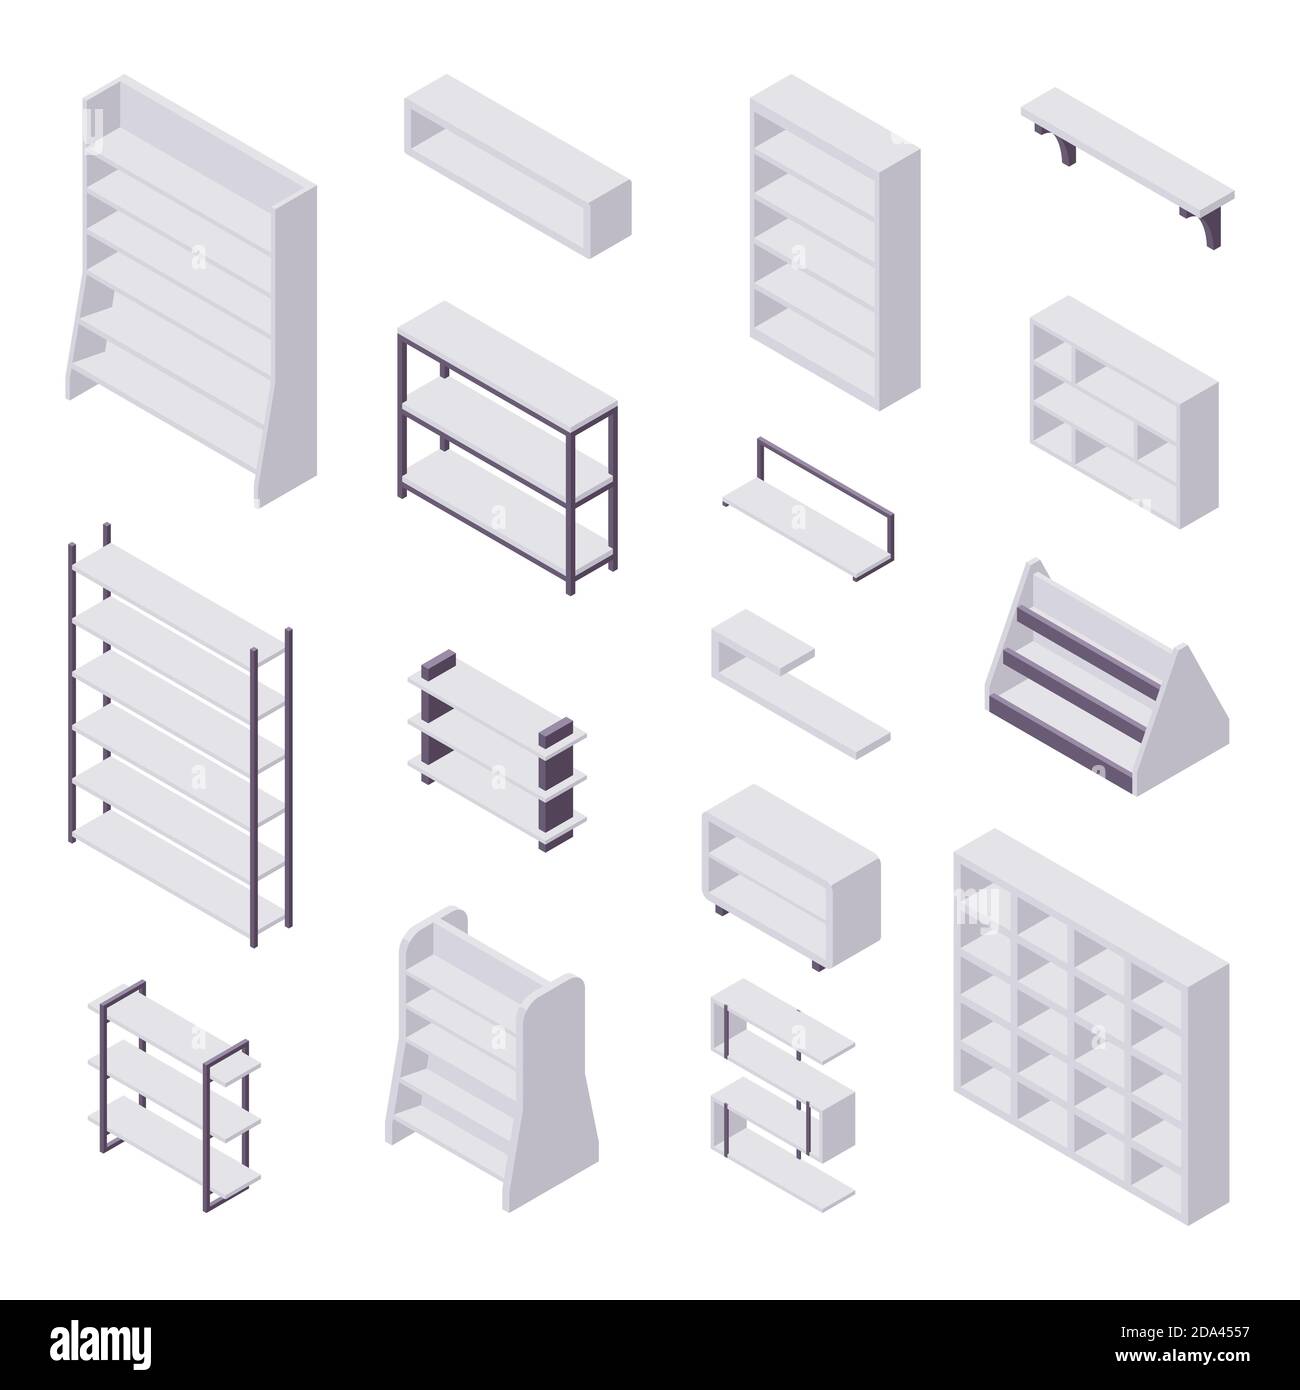 Bookshelf isometric - collection of various cases and shelves for books for home and store interior design. Stock Vector